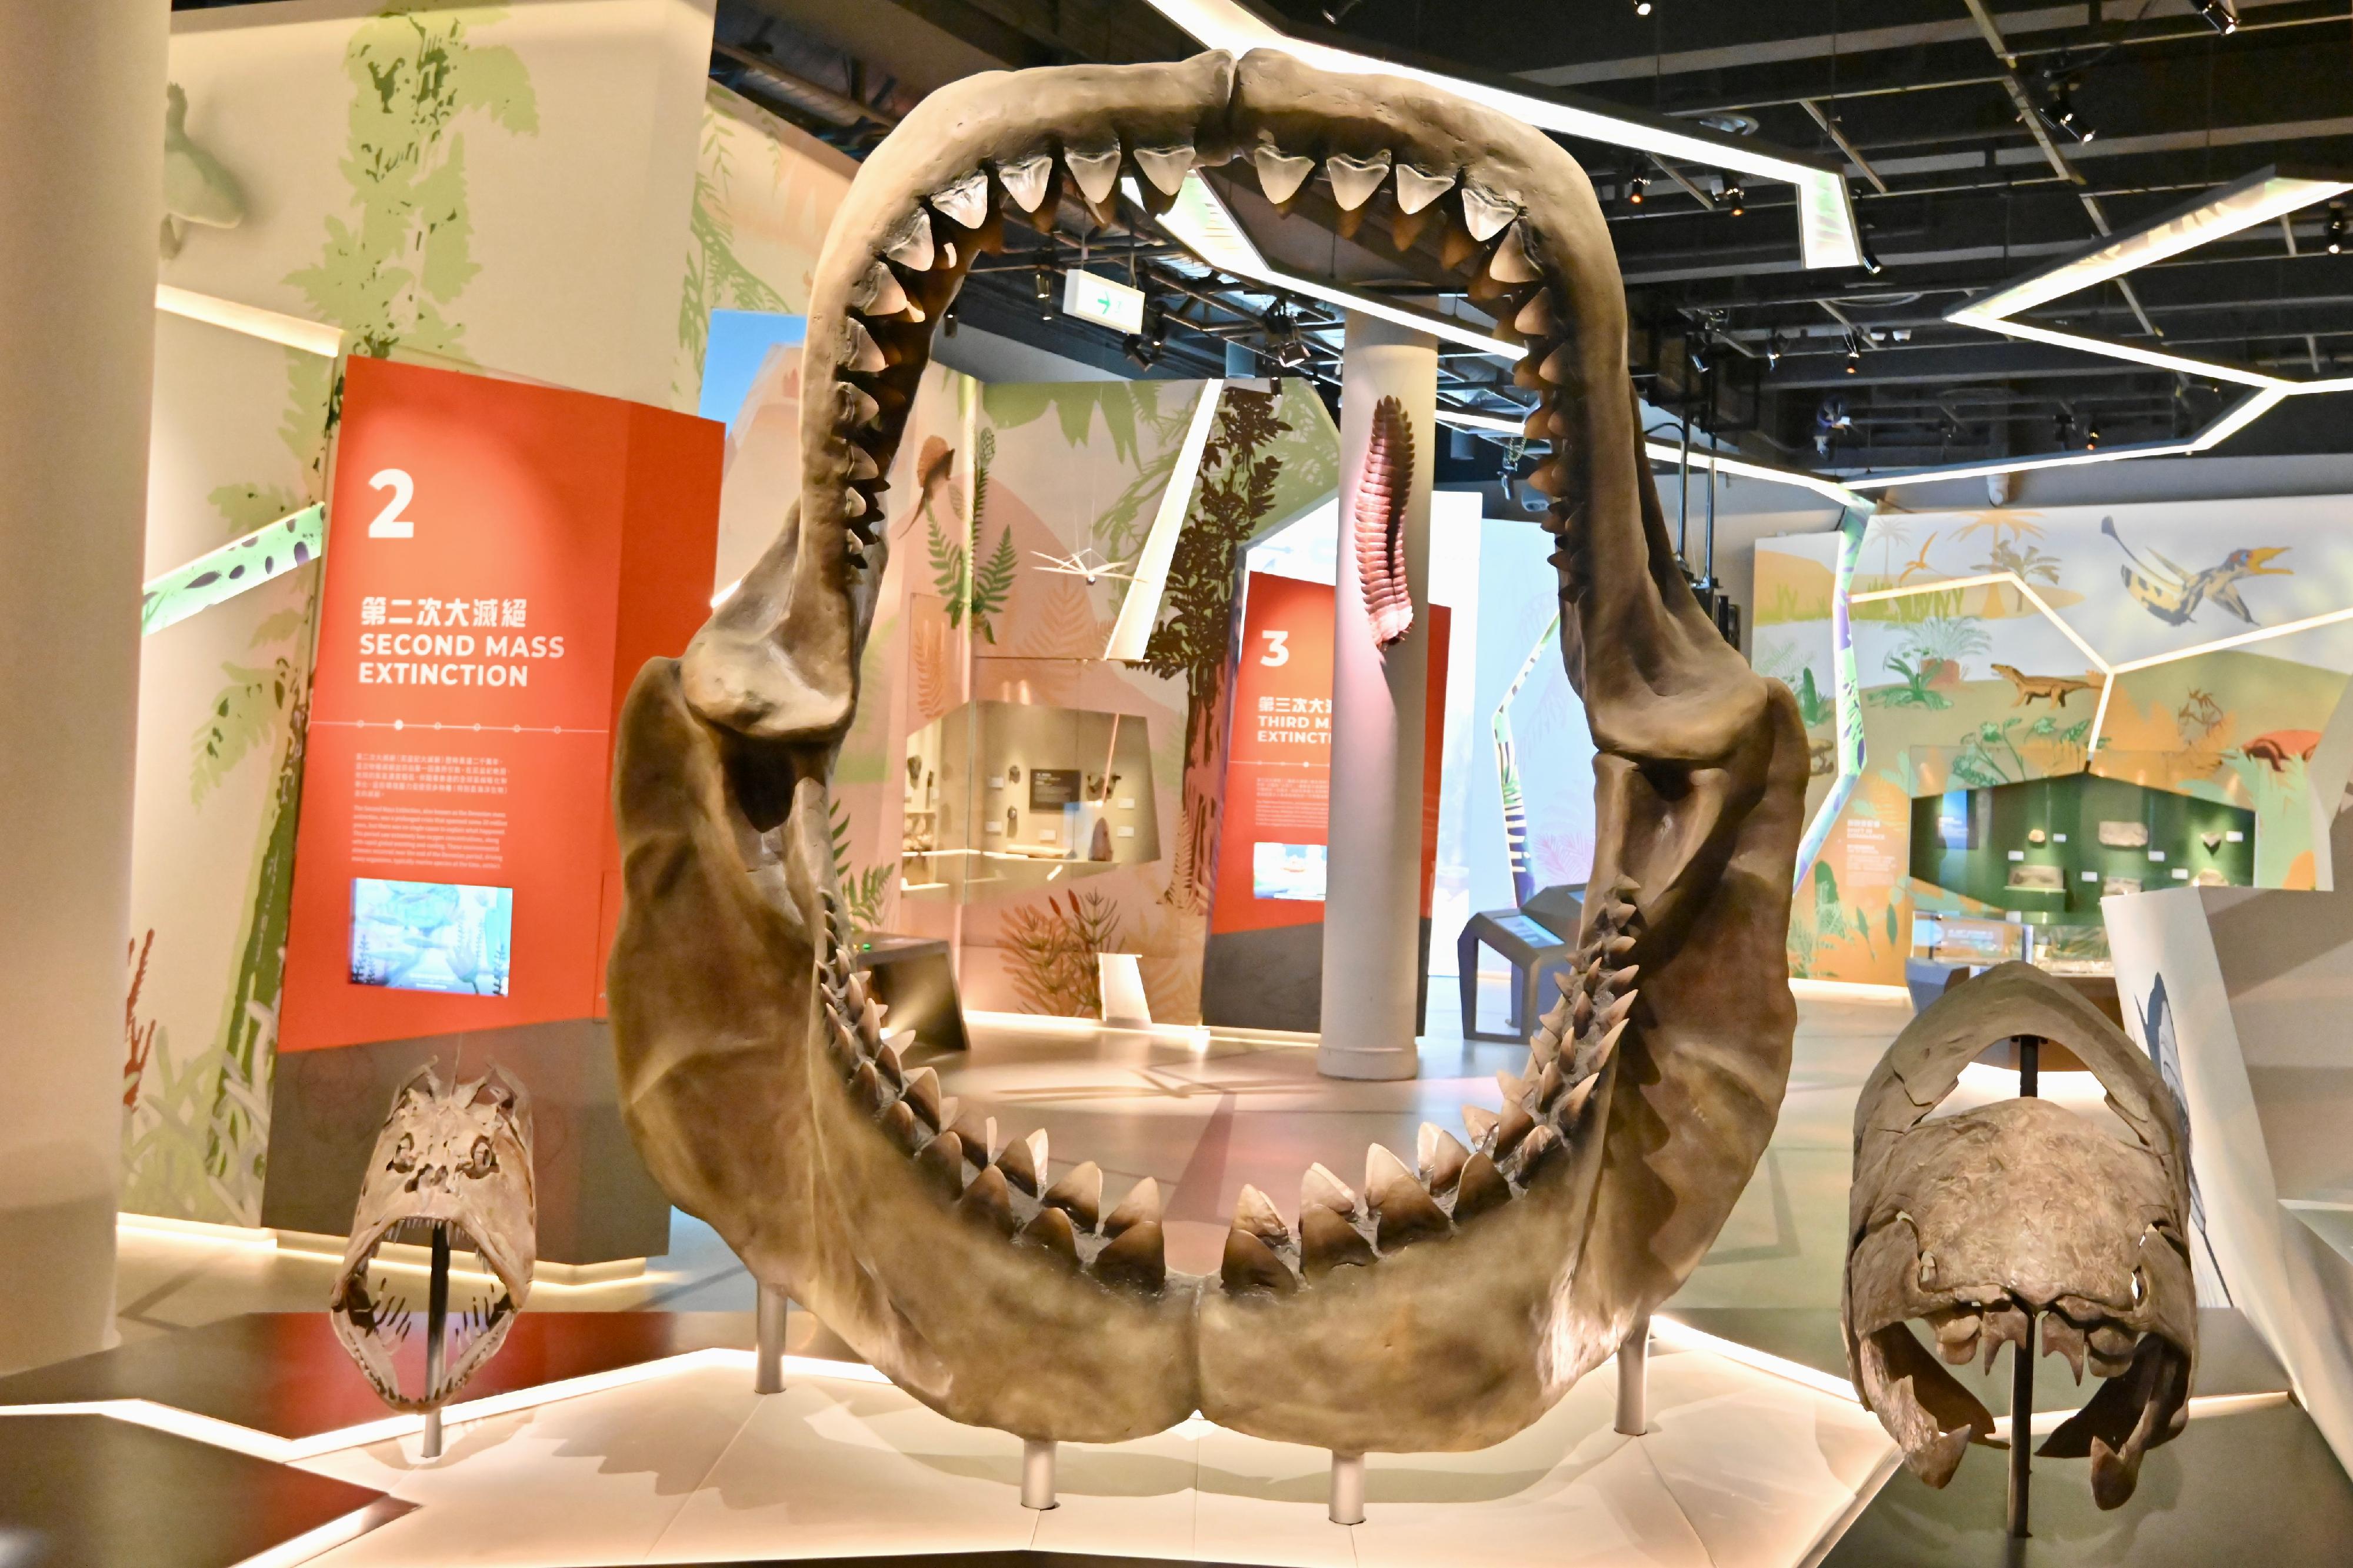 The Hong Kong Science Museum's new exhibition "Extinction·Resilience" will be open to the public from tomorrow (September 15). Photo shows 1:1 fossil replicas of (from left) Xiphactinus, Megalodon and Dunkleosteus.